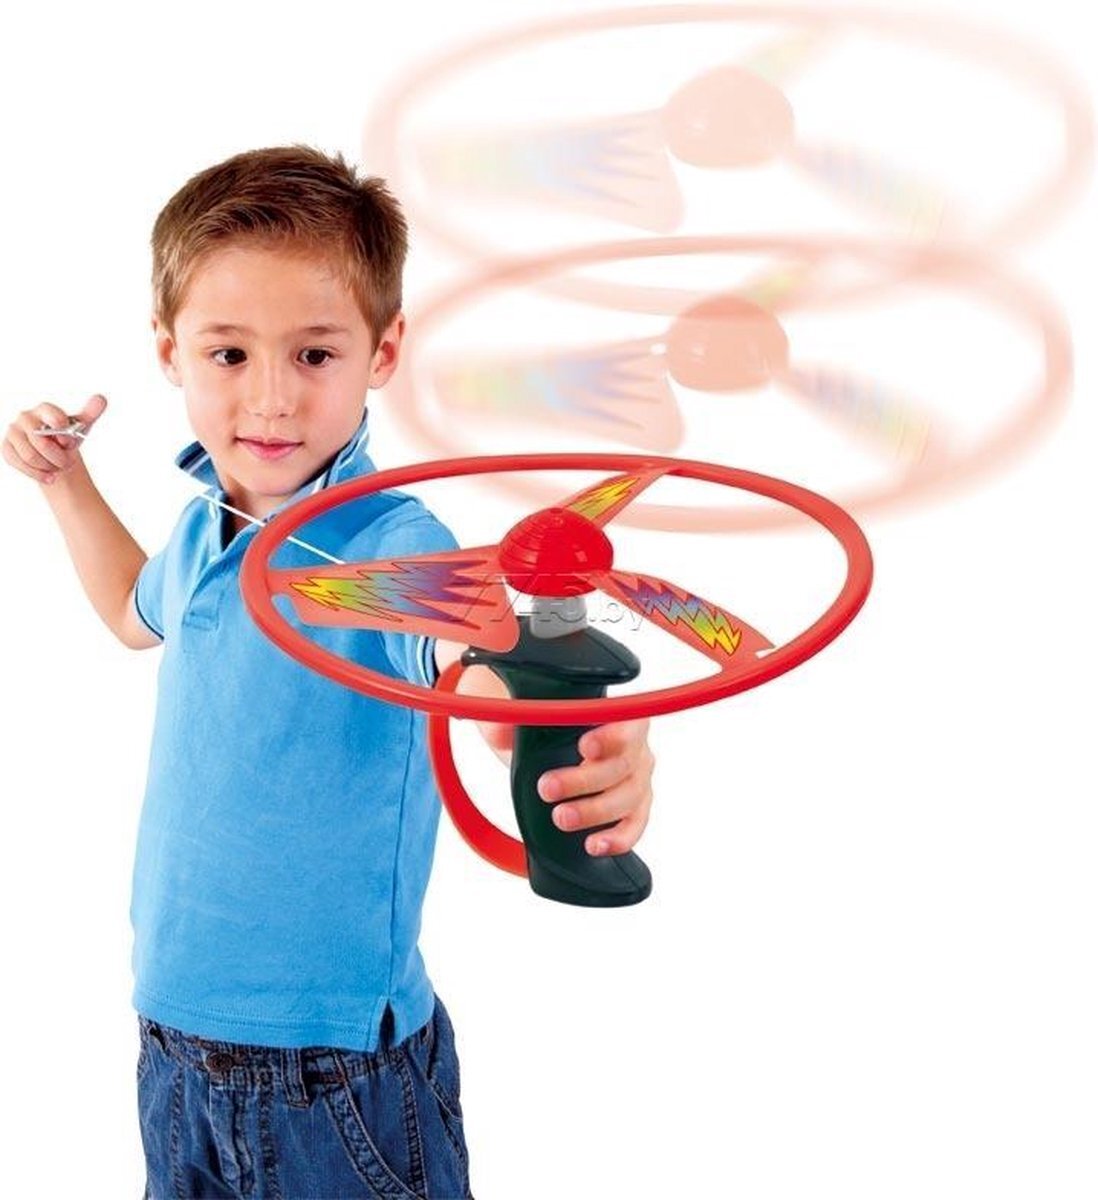 GO&Play PlayGo Flying Disc